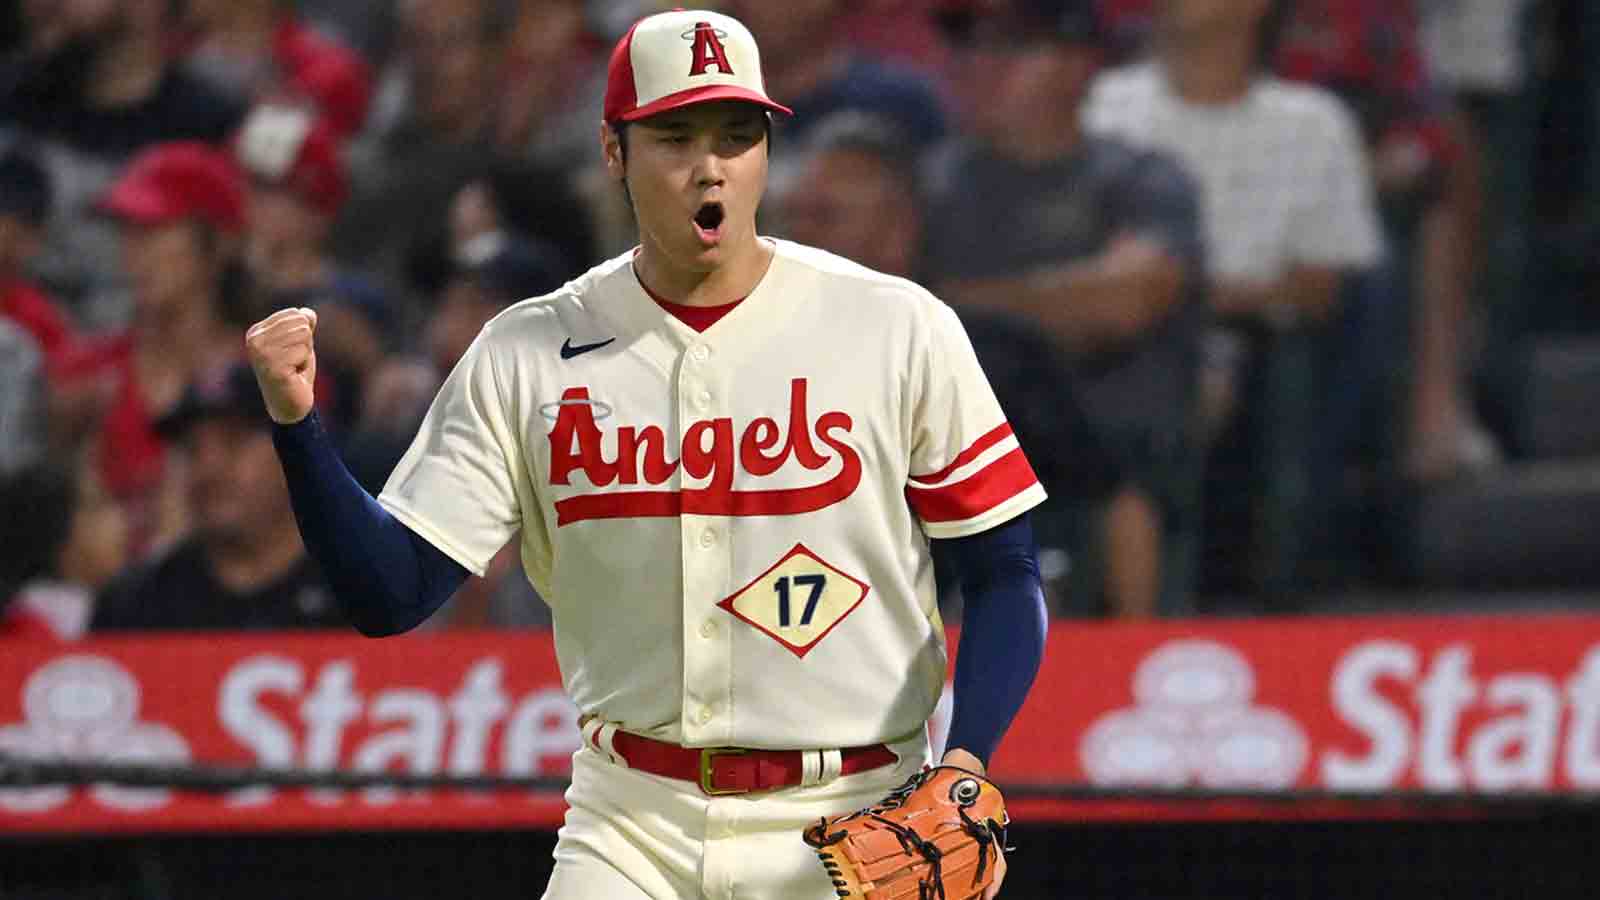 Angels agree to one-year, $30M contract with Shohei Ohtani for 2023 season